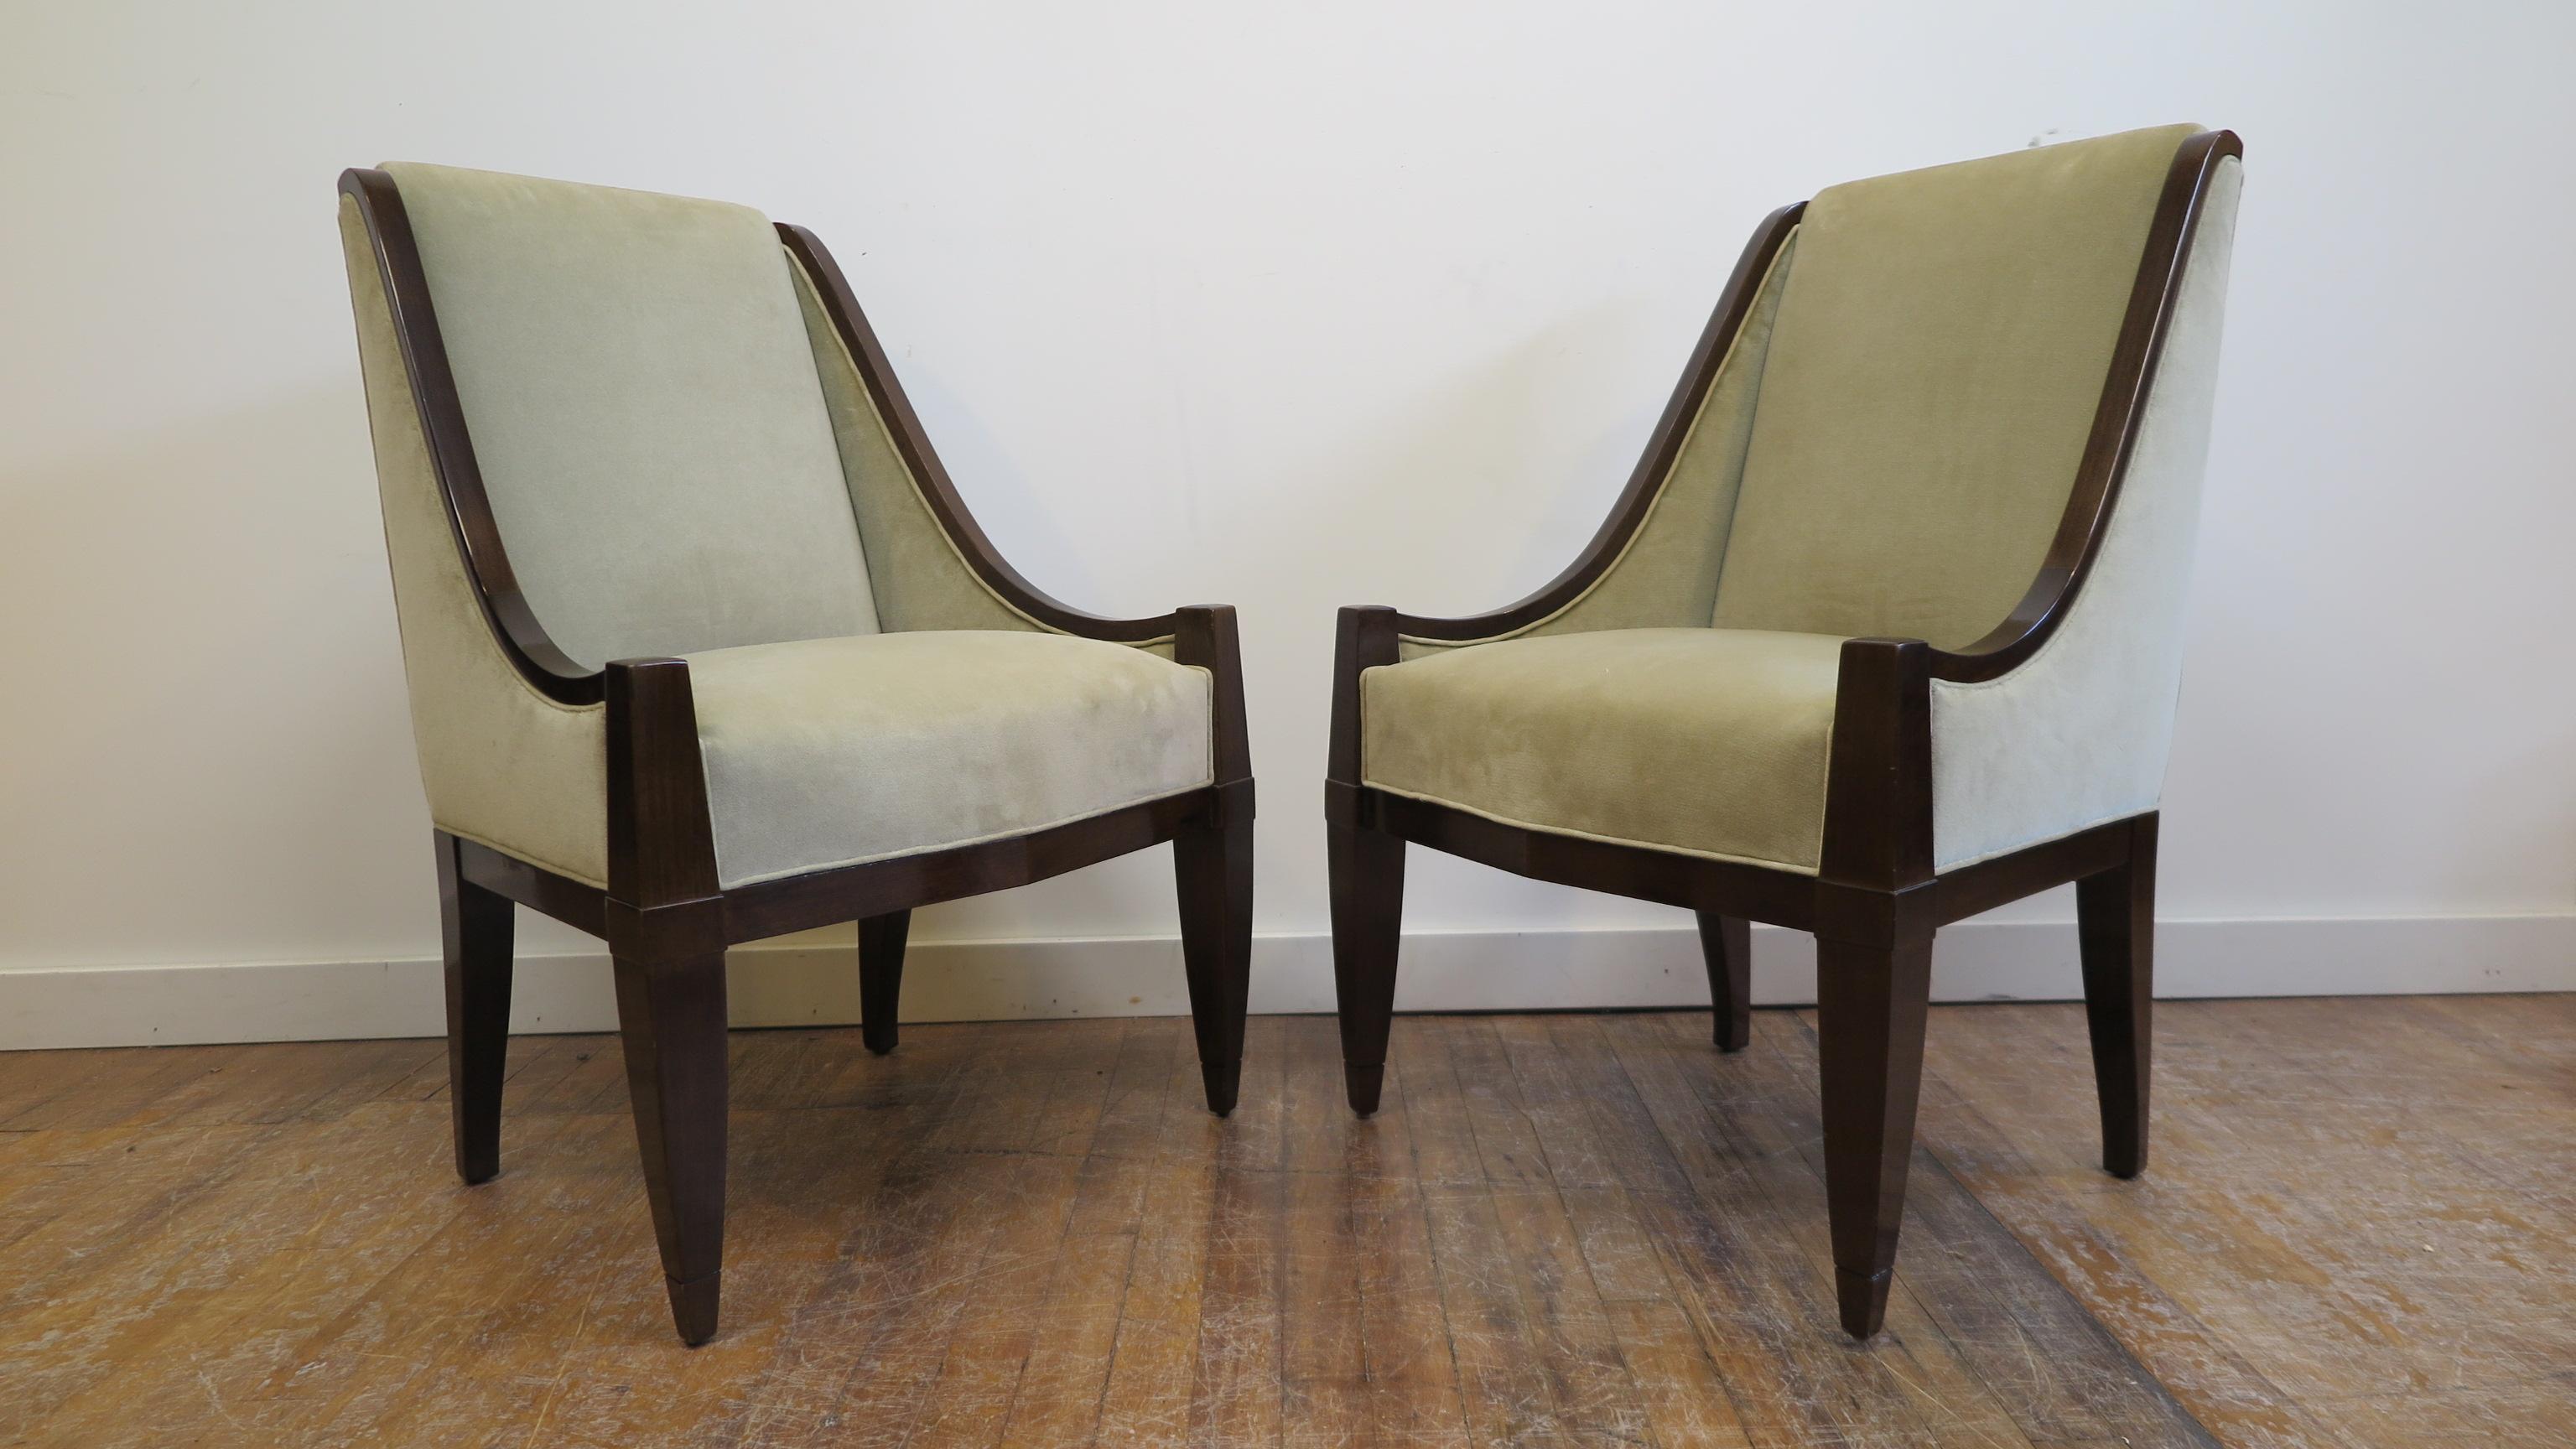 Pair of Bergeses chairs by André Sornay. Side chairs by André Sornay in very good condition, some small dings to the legs, upholstery is clean, we recommend new upholstery. Marked to the front right side of each chair with Sornay Brand. 1930, Lyons,